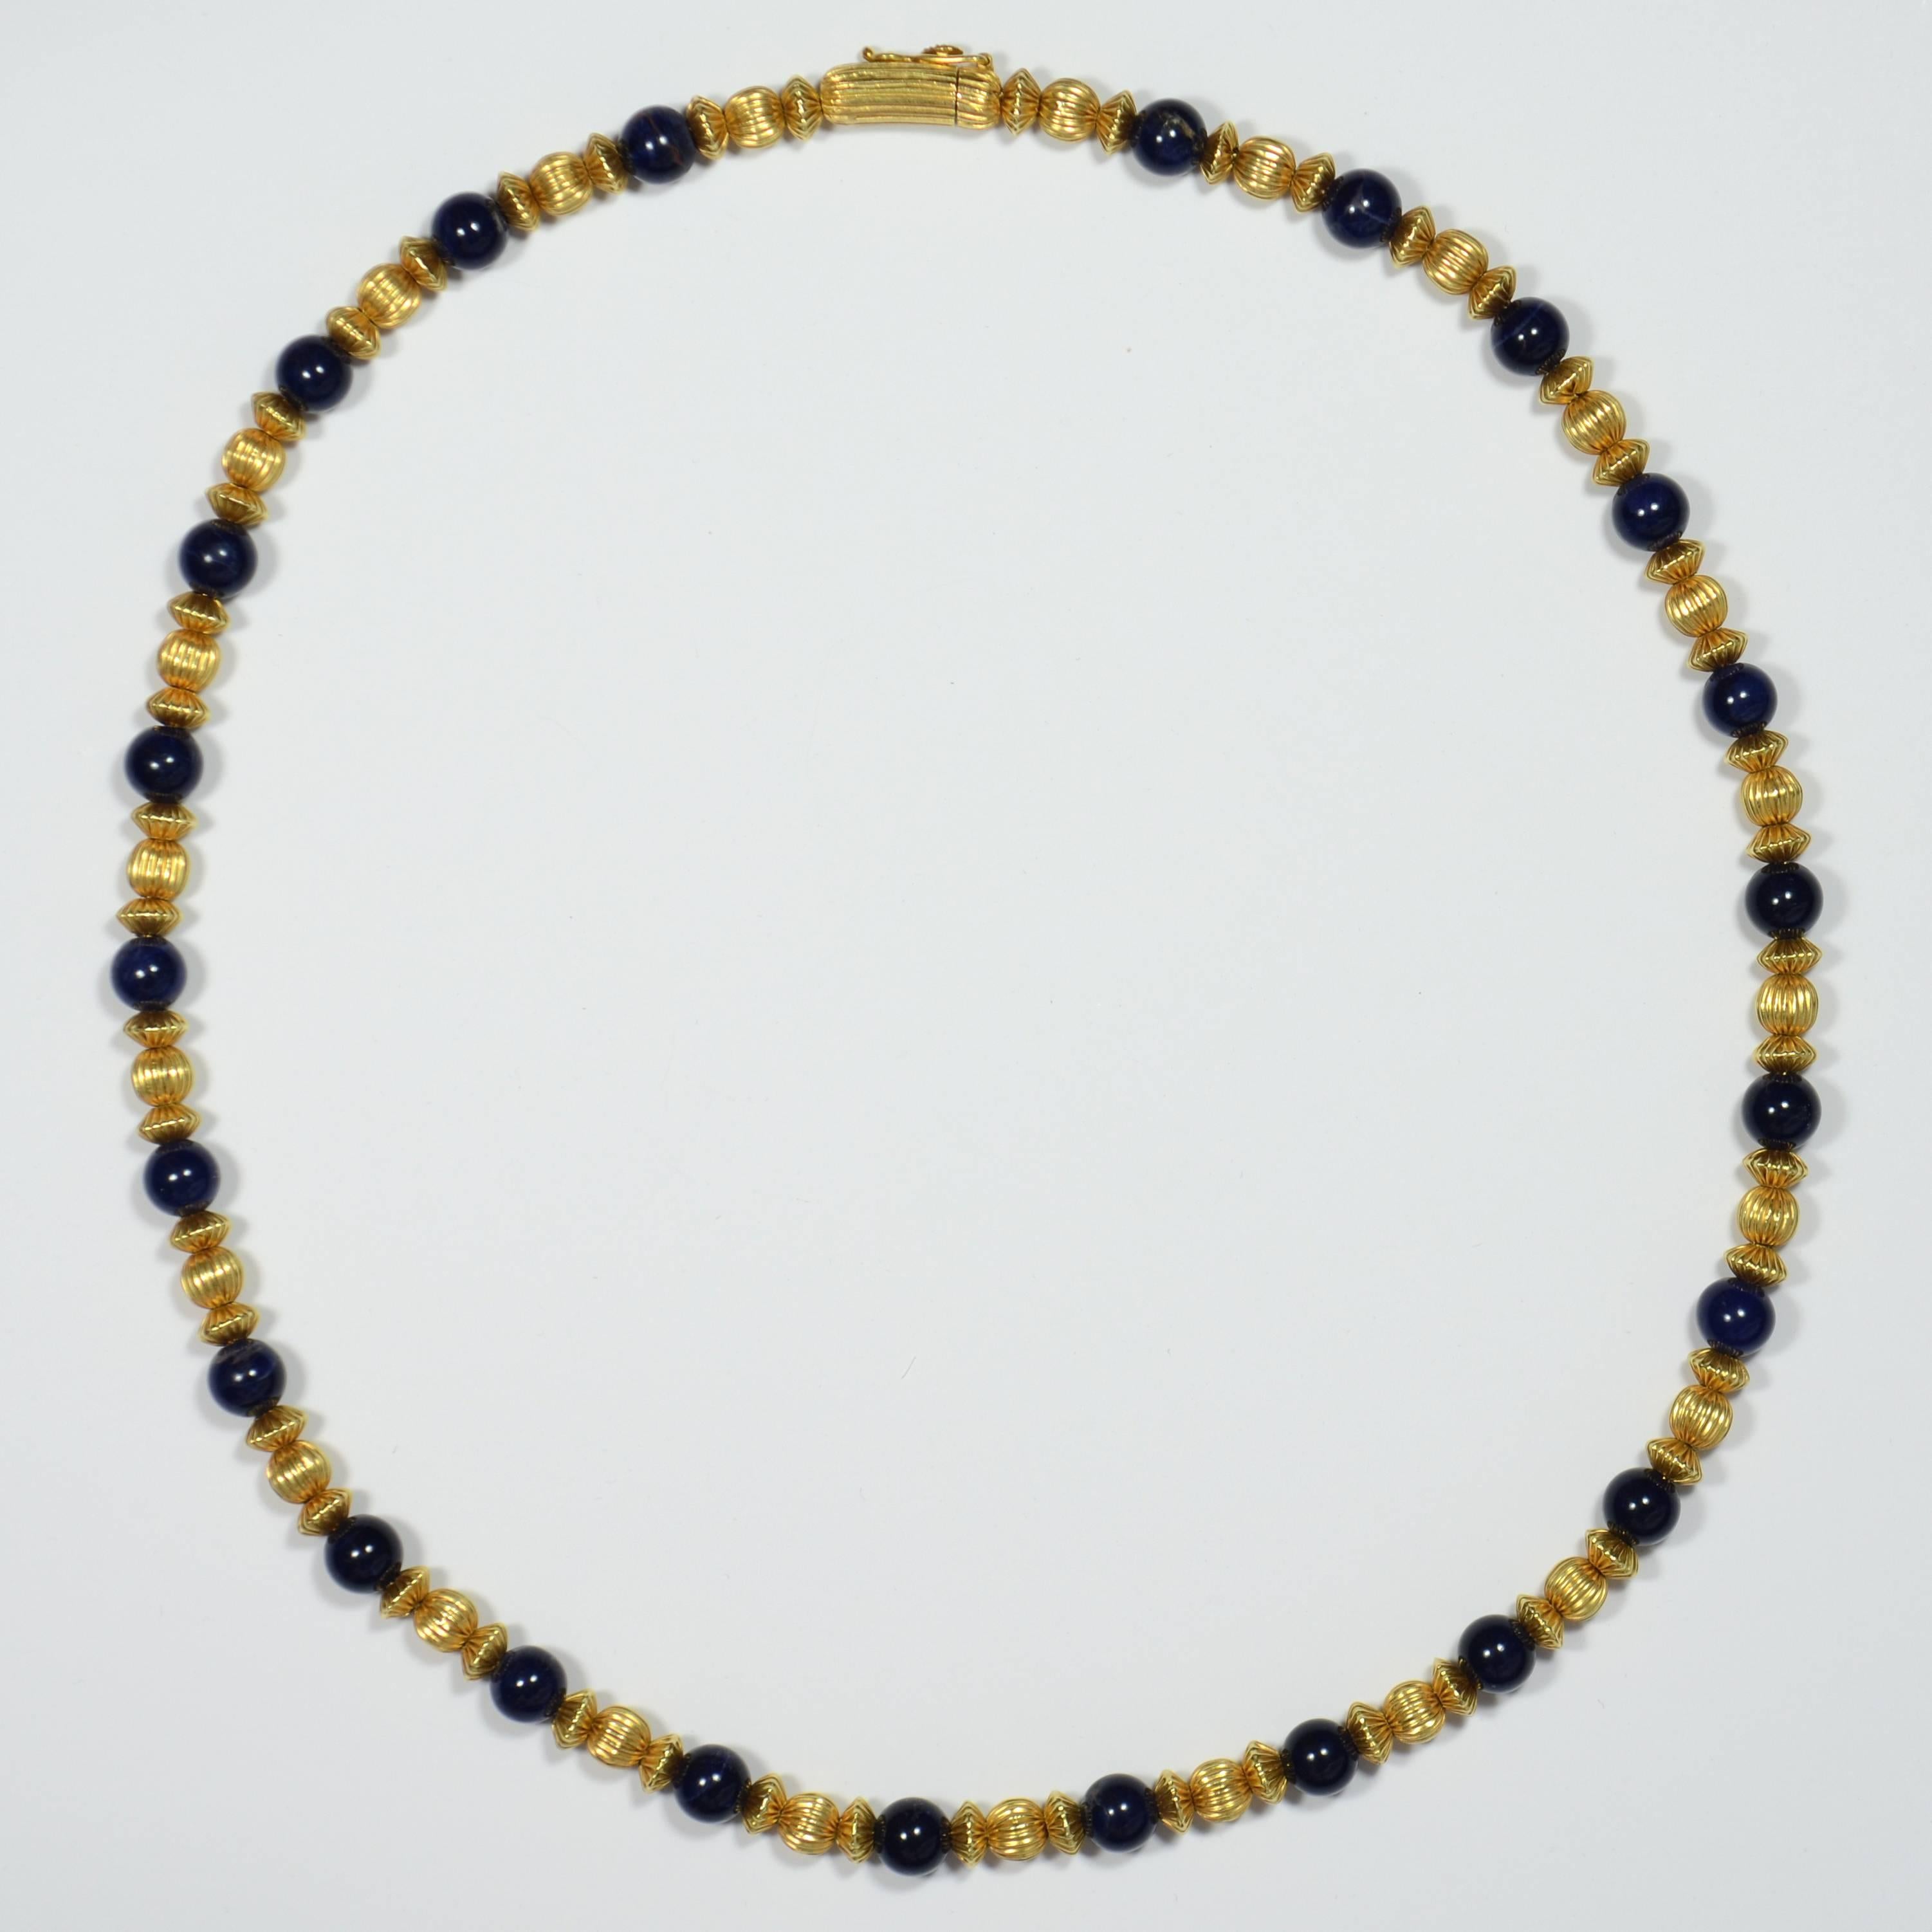 An 18 carat yellow gold necklace by Greek designer Ilias Lalaounis, with 24 dark blue sodalite beads each interspaced by 3 round and saucer shaped fluted gold beads. The beads are strung on a gold foxtail chain.

The clasp is marked ‘GREECE’, 750